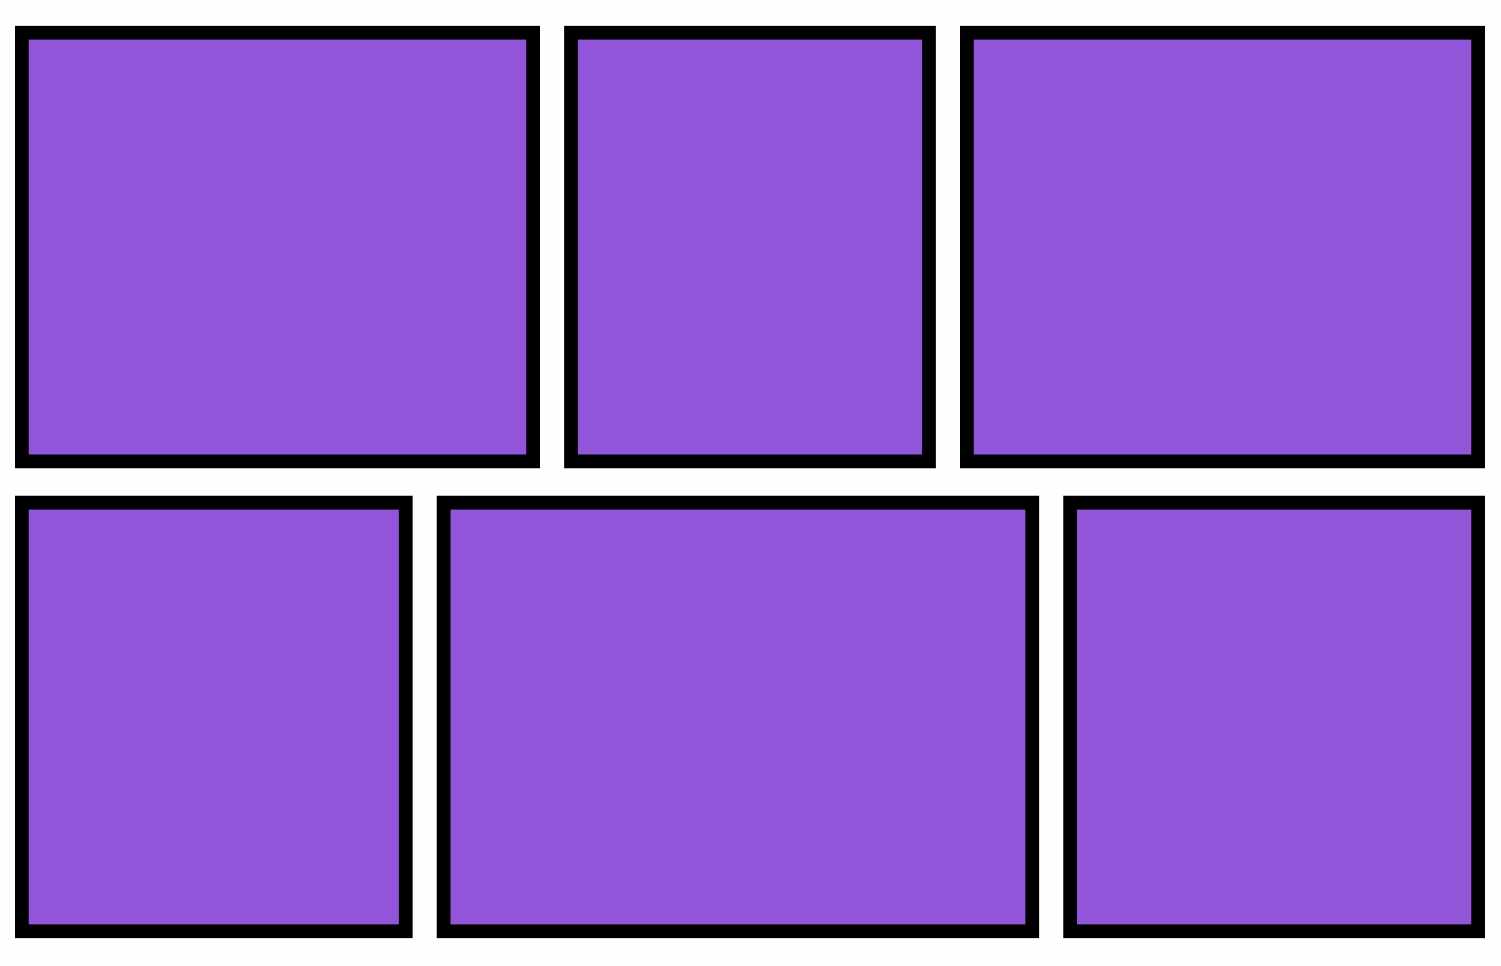 Justified grid layout